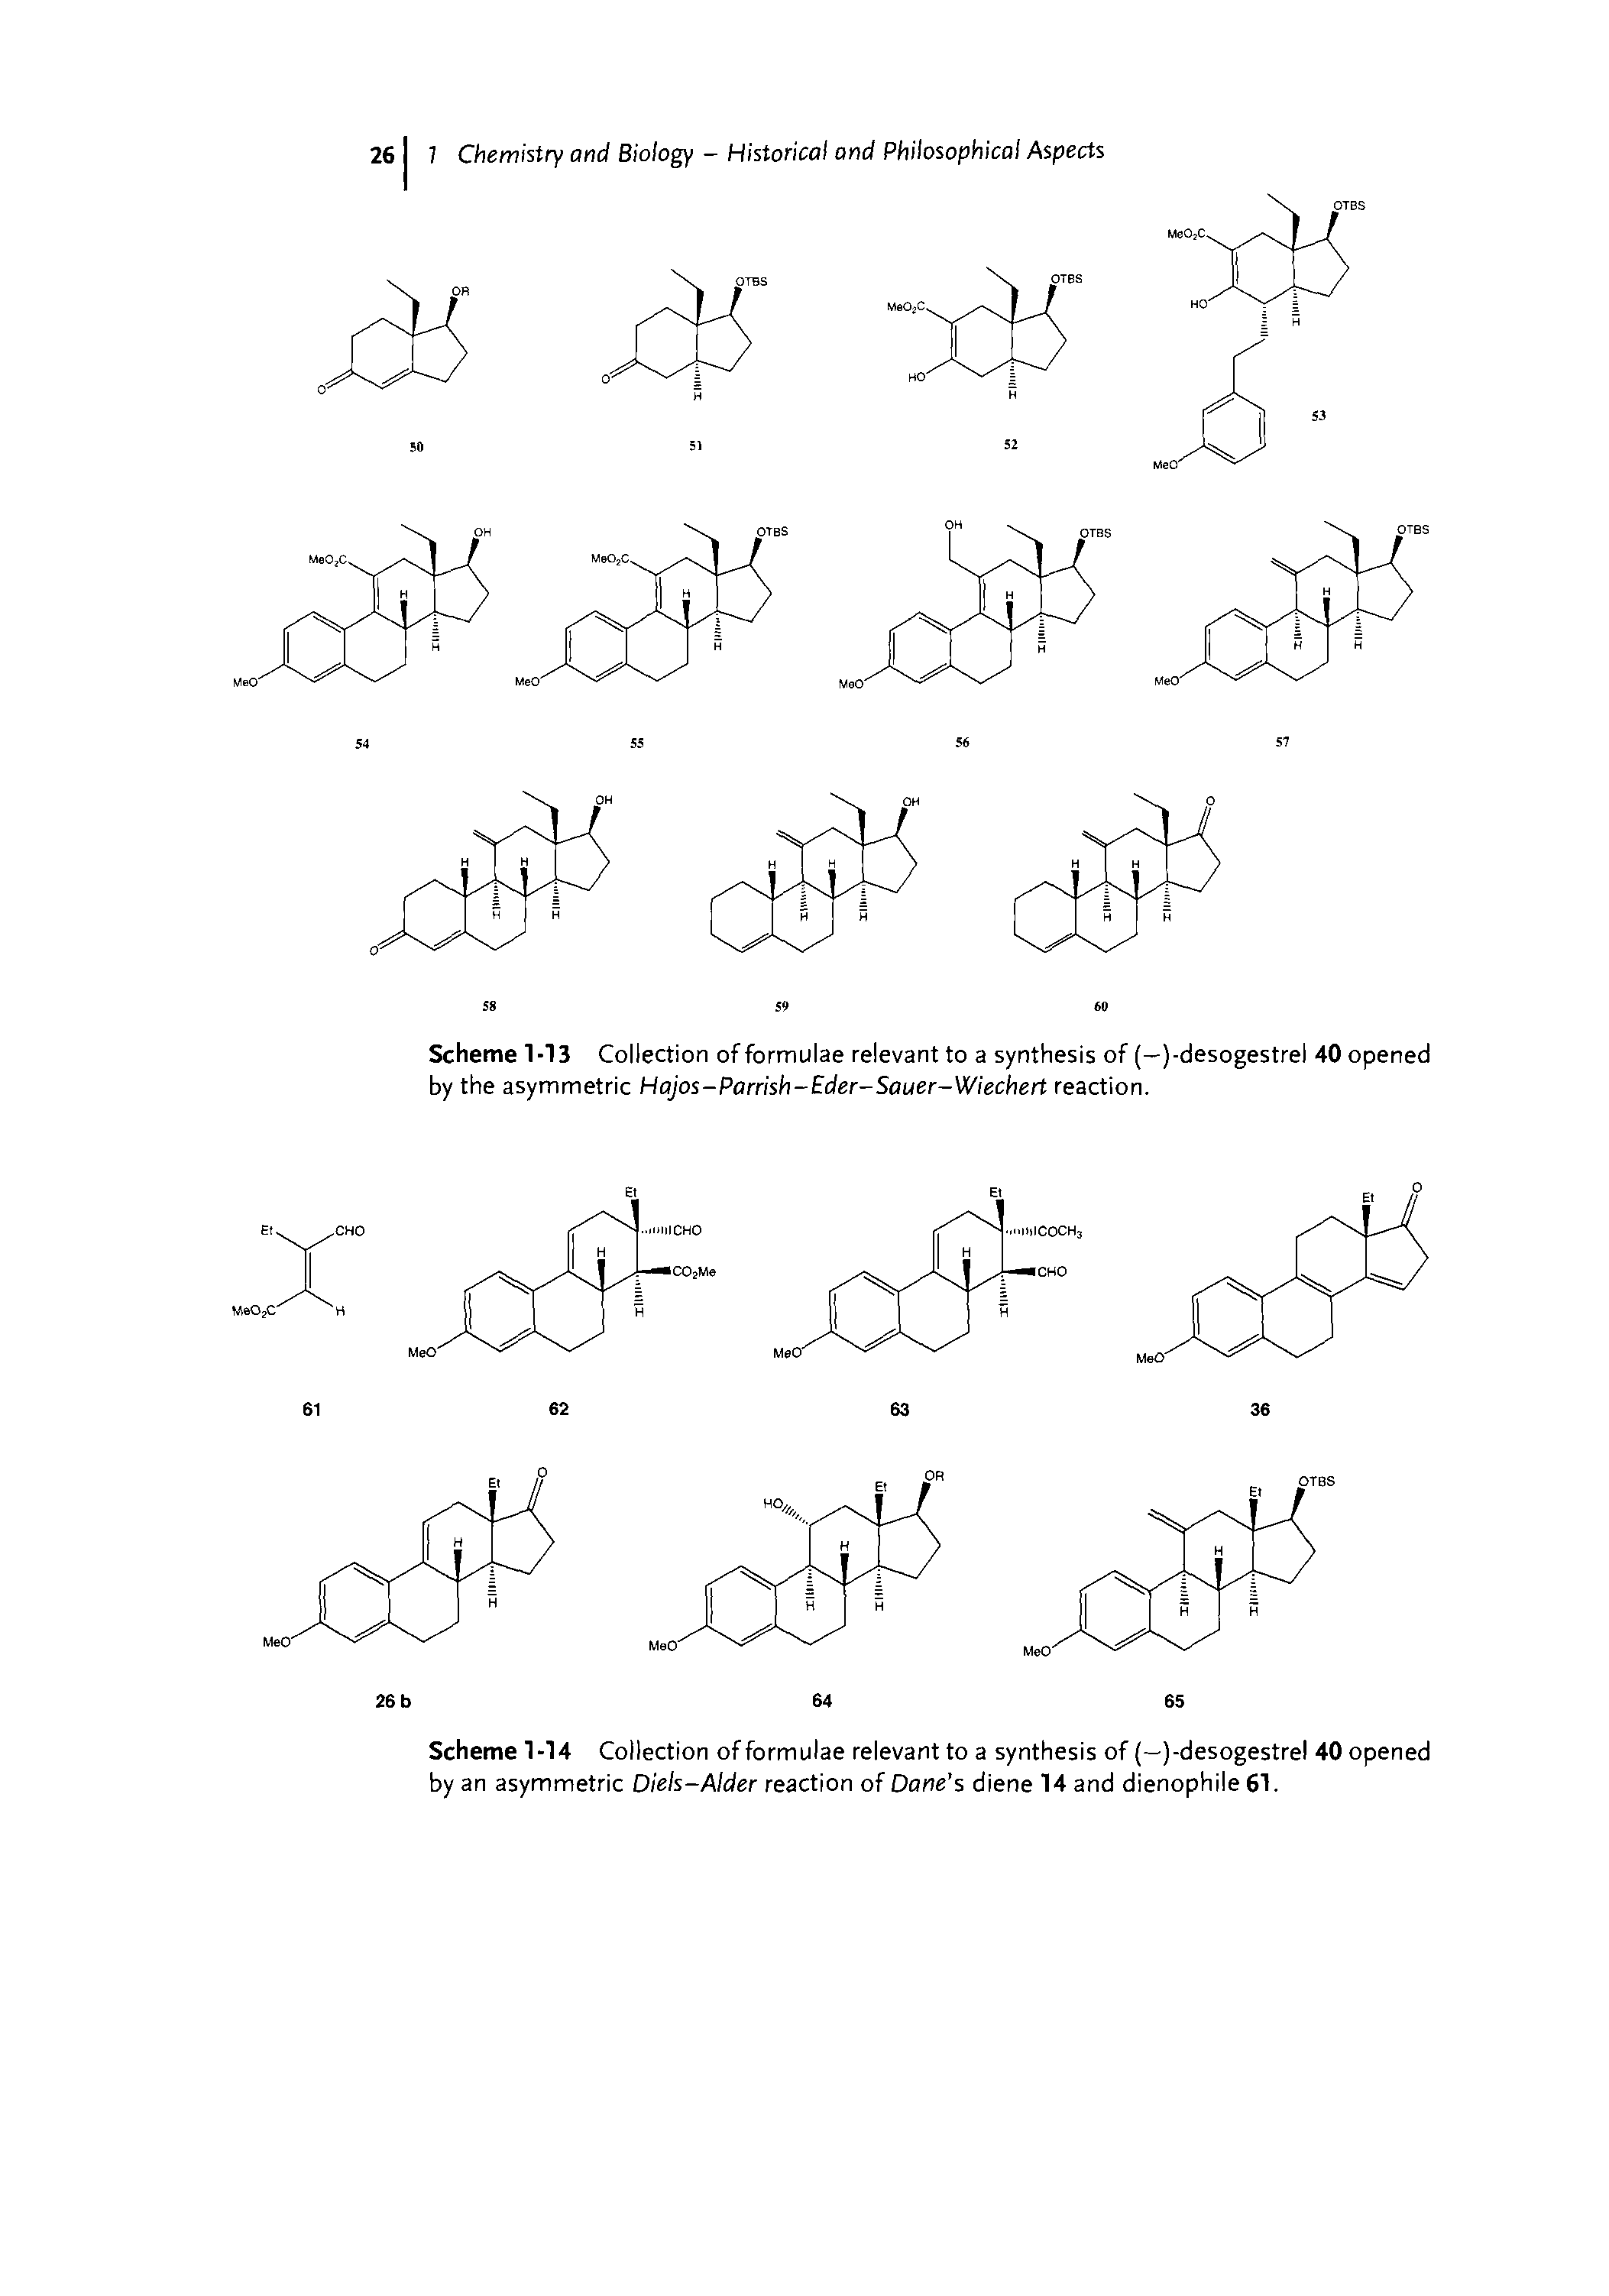 Scheme 1-14 Collection of formulae relevant to a synthesis of (—)-desogestrel 40 opened by an asymmetric Diels-Alder reaction of Dane s diene 14 and dienophile 61.